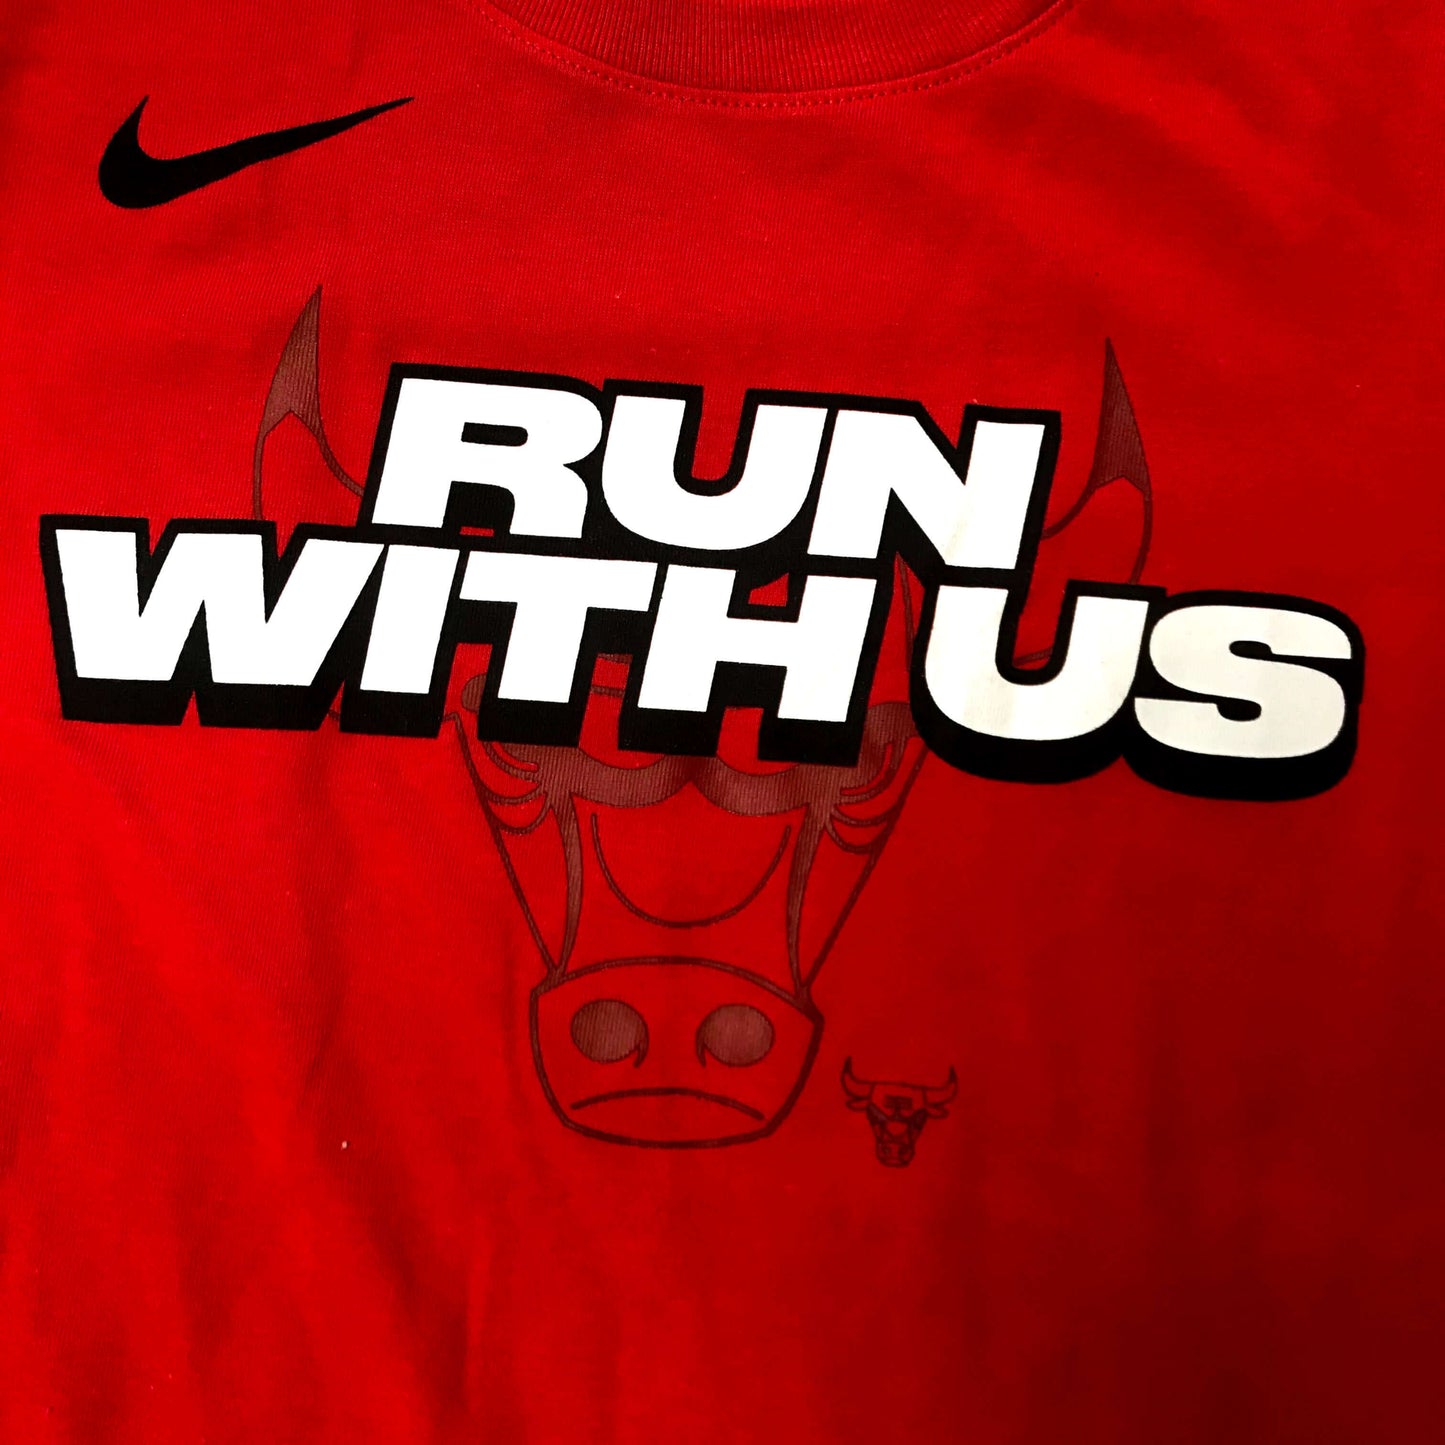 Chicago Bulls "Run With Us" Youth T-shirt - Red